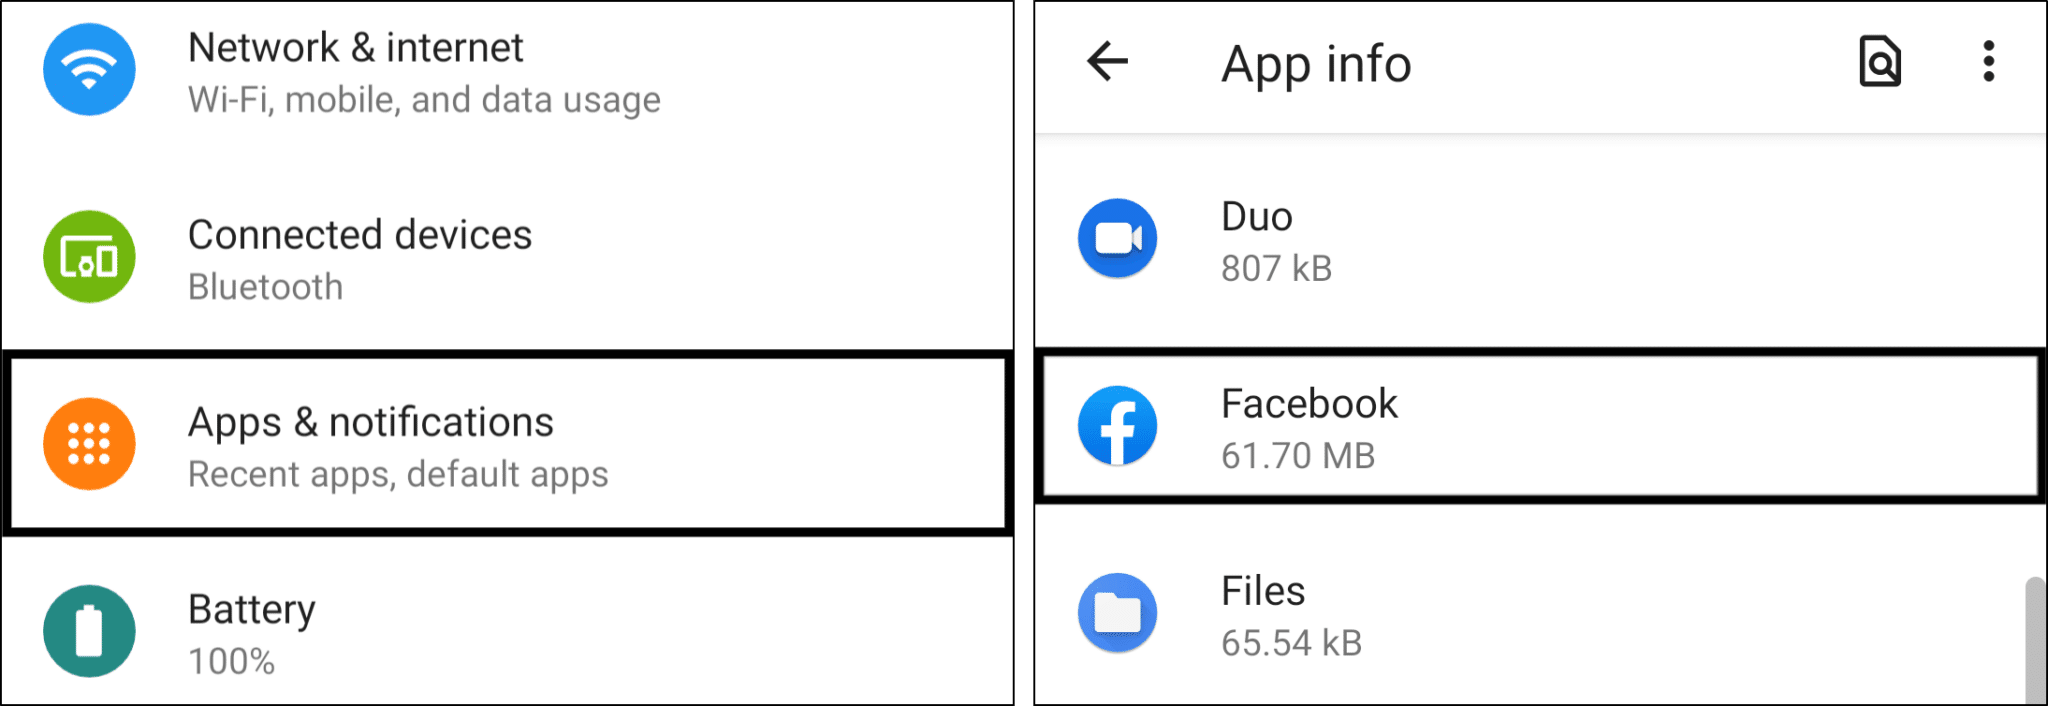 access Facebook app settings in system settings on Android to clear cache and data and fix Games not working or loading